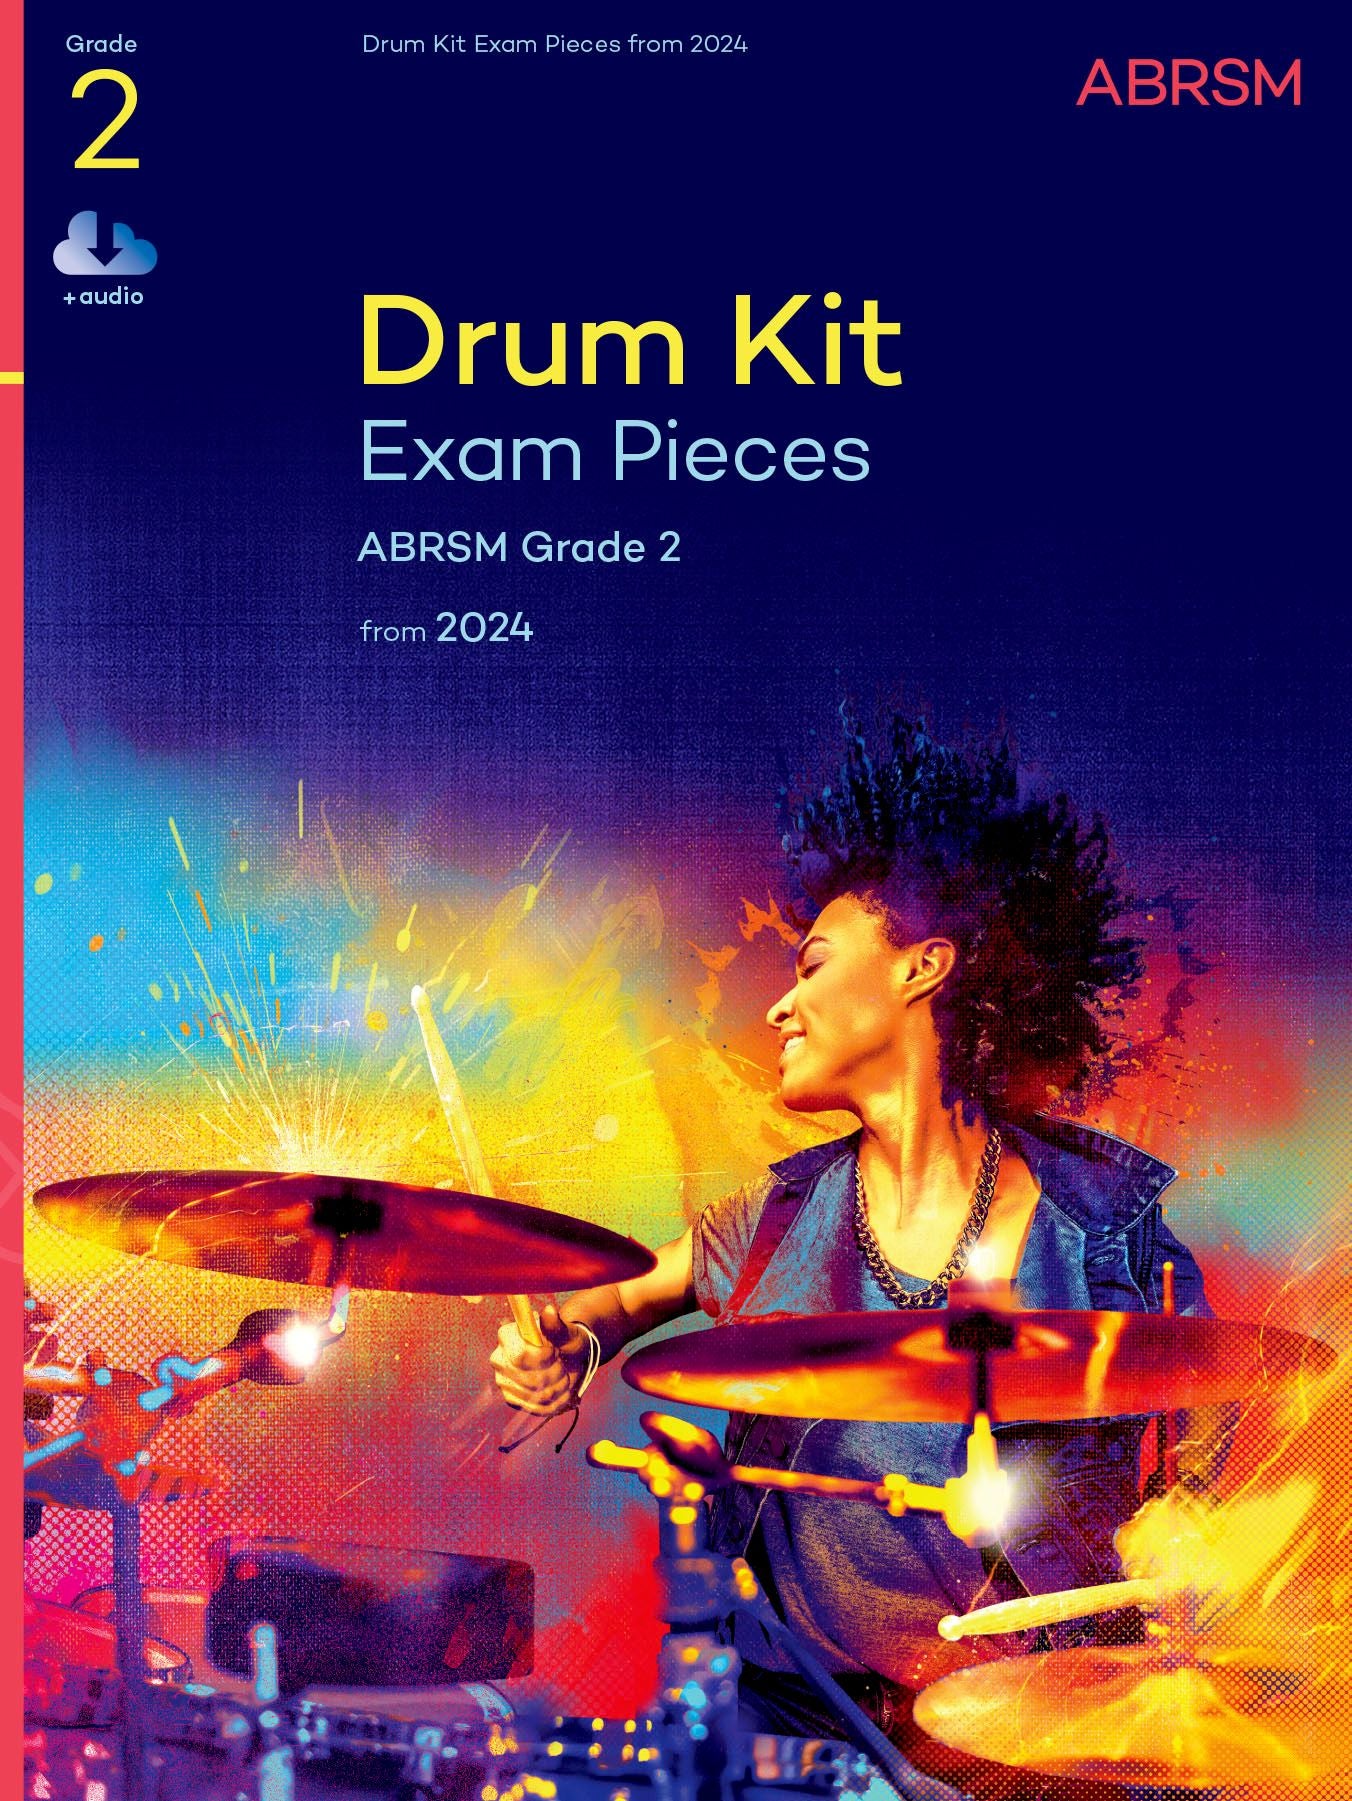 ABRSM Drum Kit Exam Pieces Grade 2 from 2024 (w/ Audio)